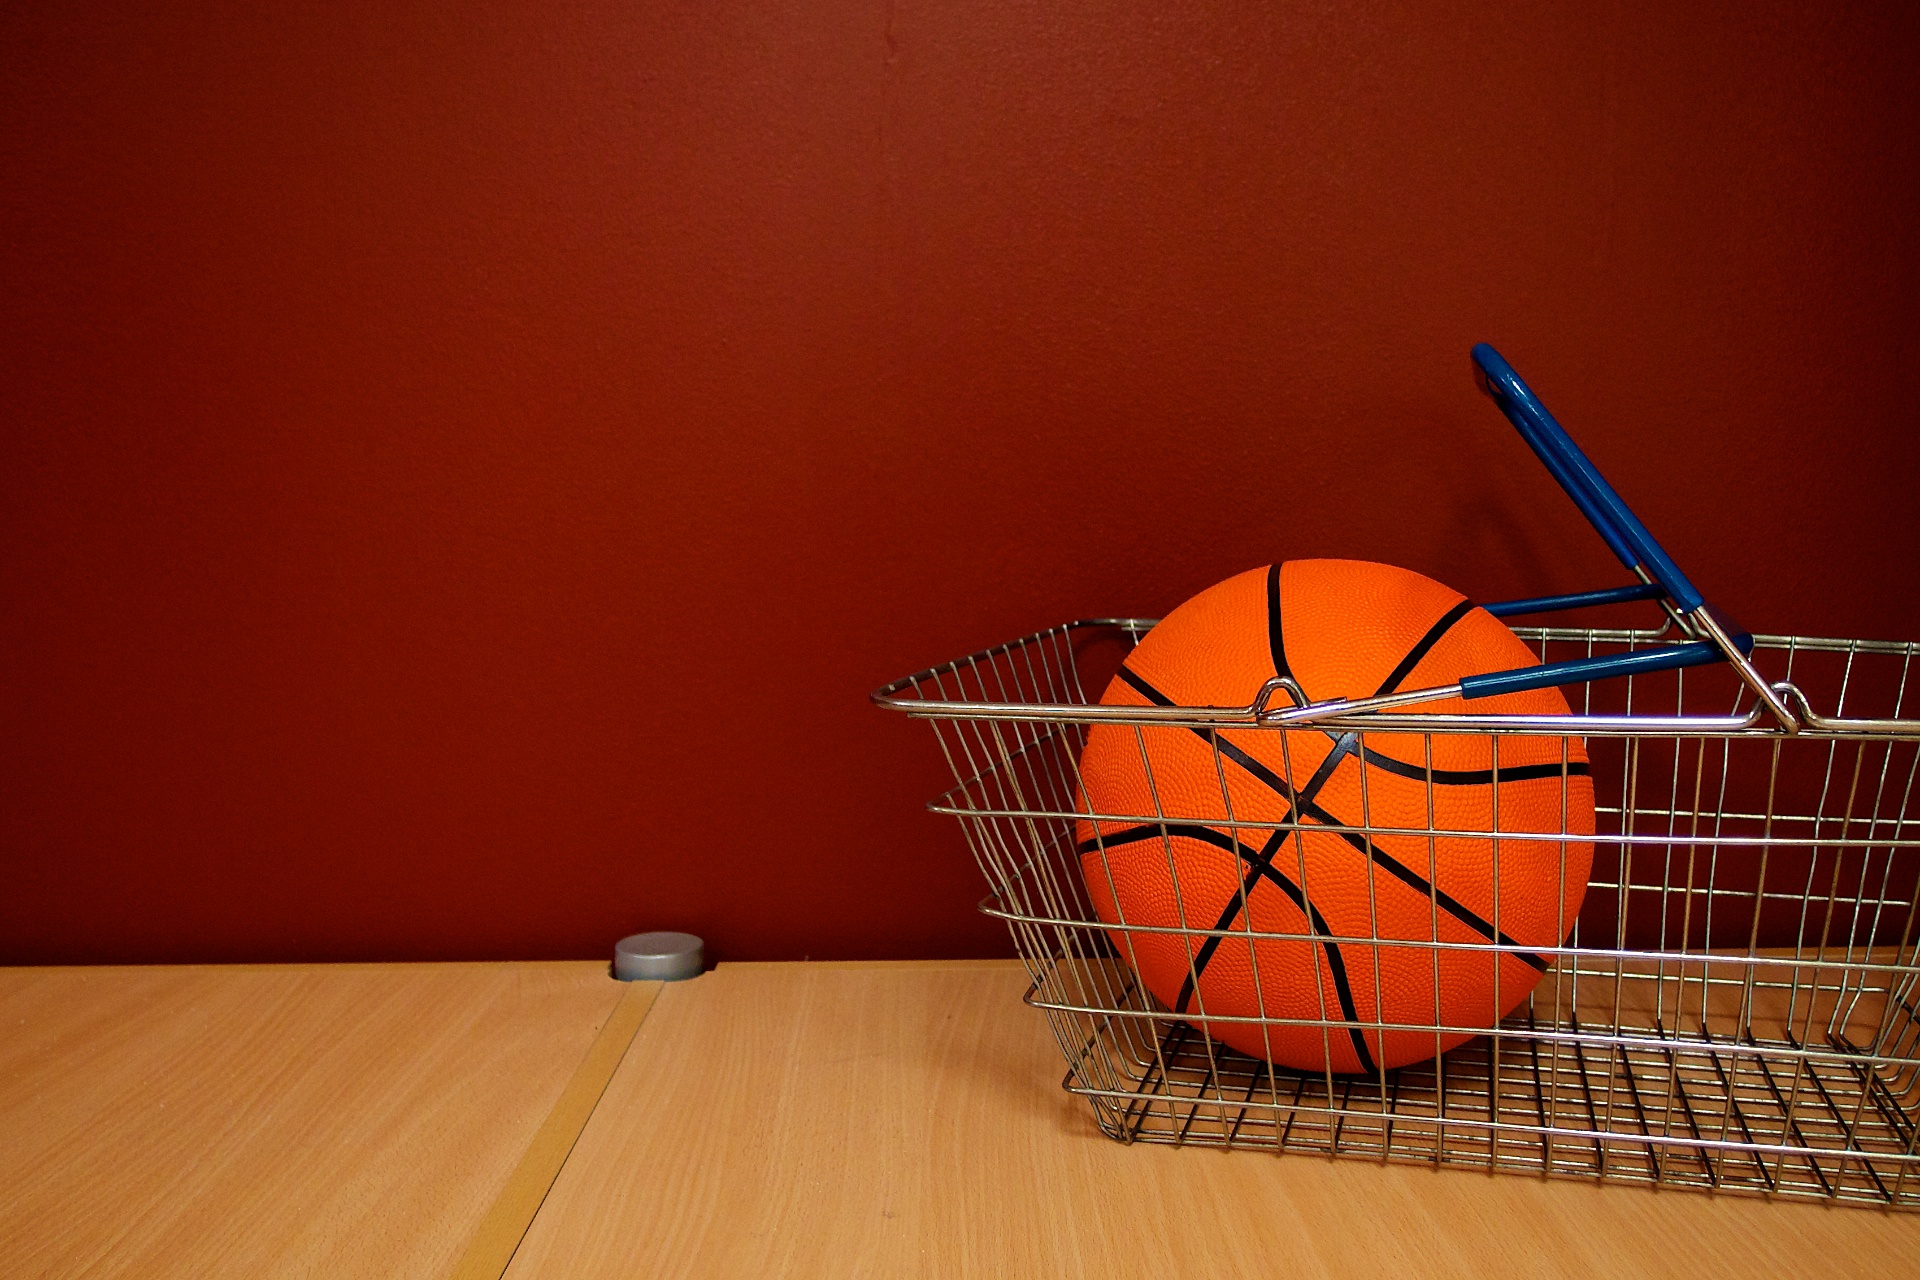 there is a wire basket and two oranges